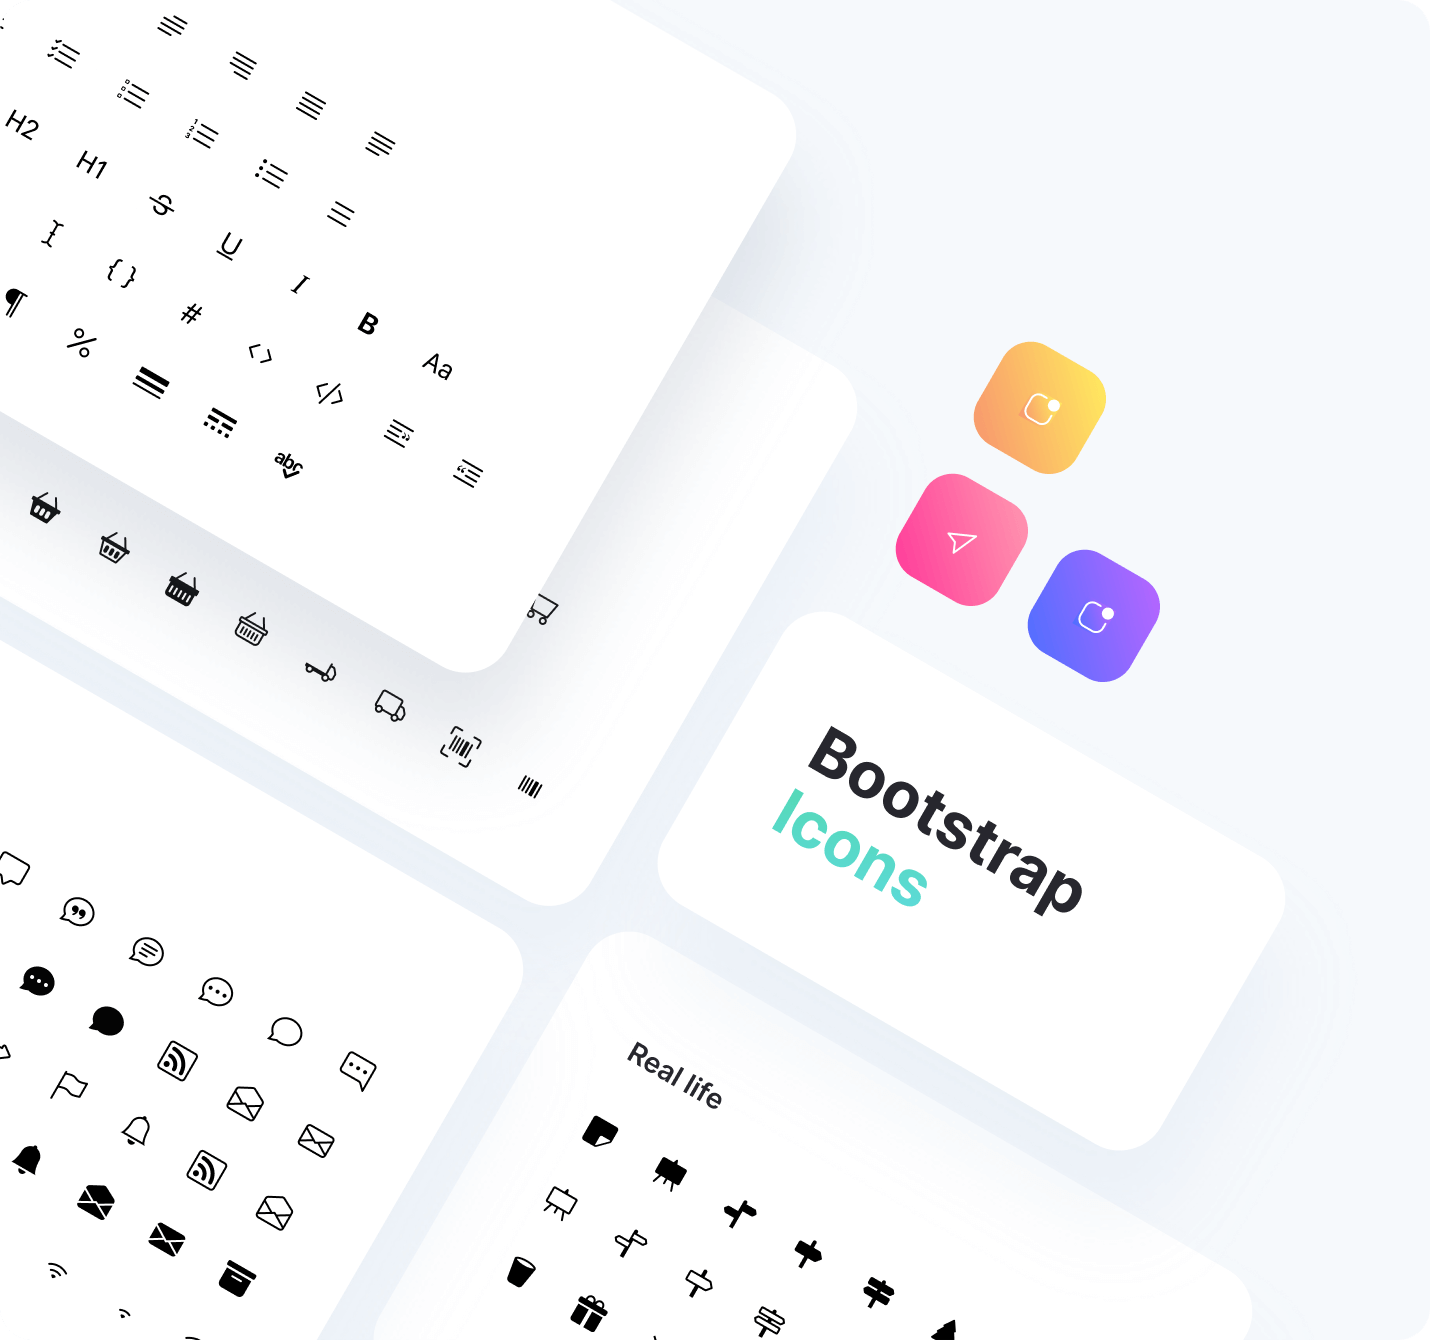 1400+ Bootstrap icons